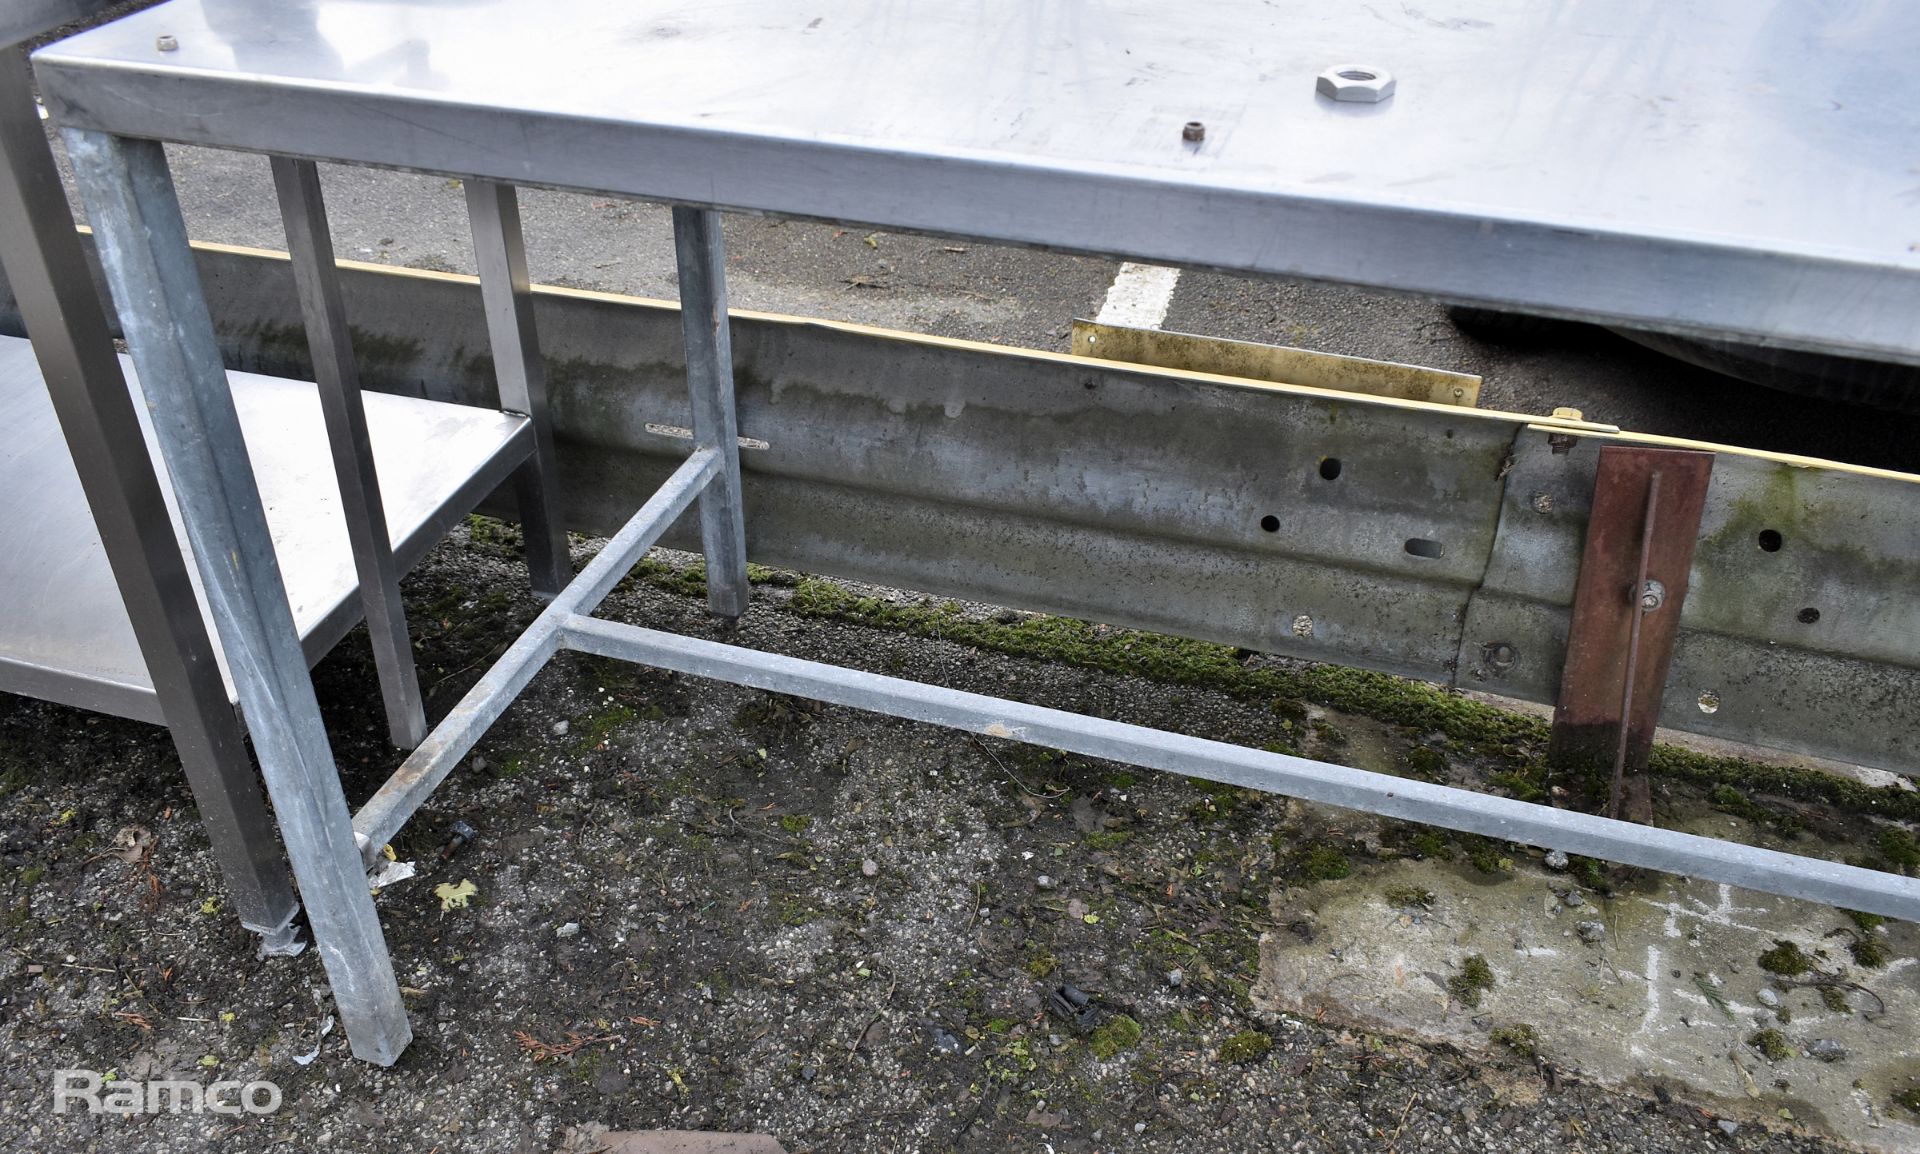 Stainless steel table - L 320 x W 77 x H 86cm - Image 4 of 4